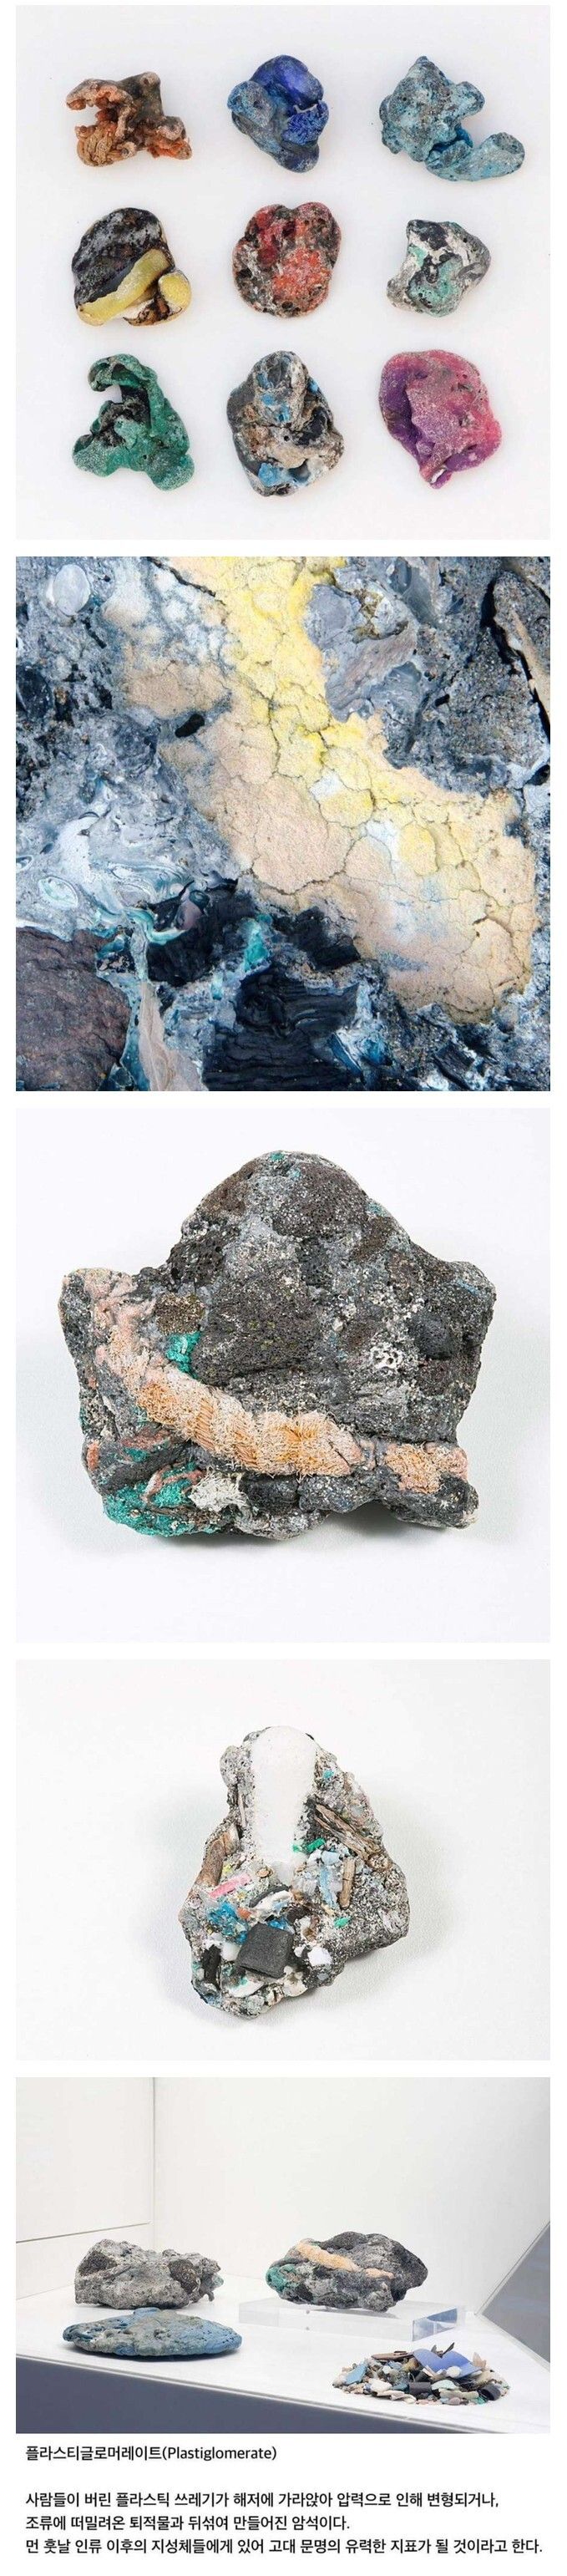 A mineral made by mankind.